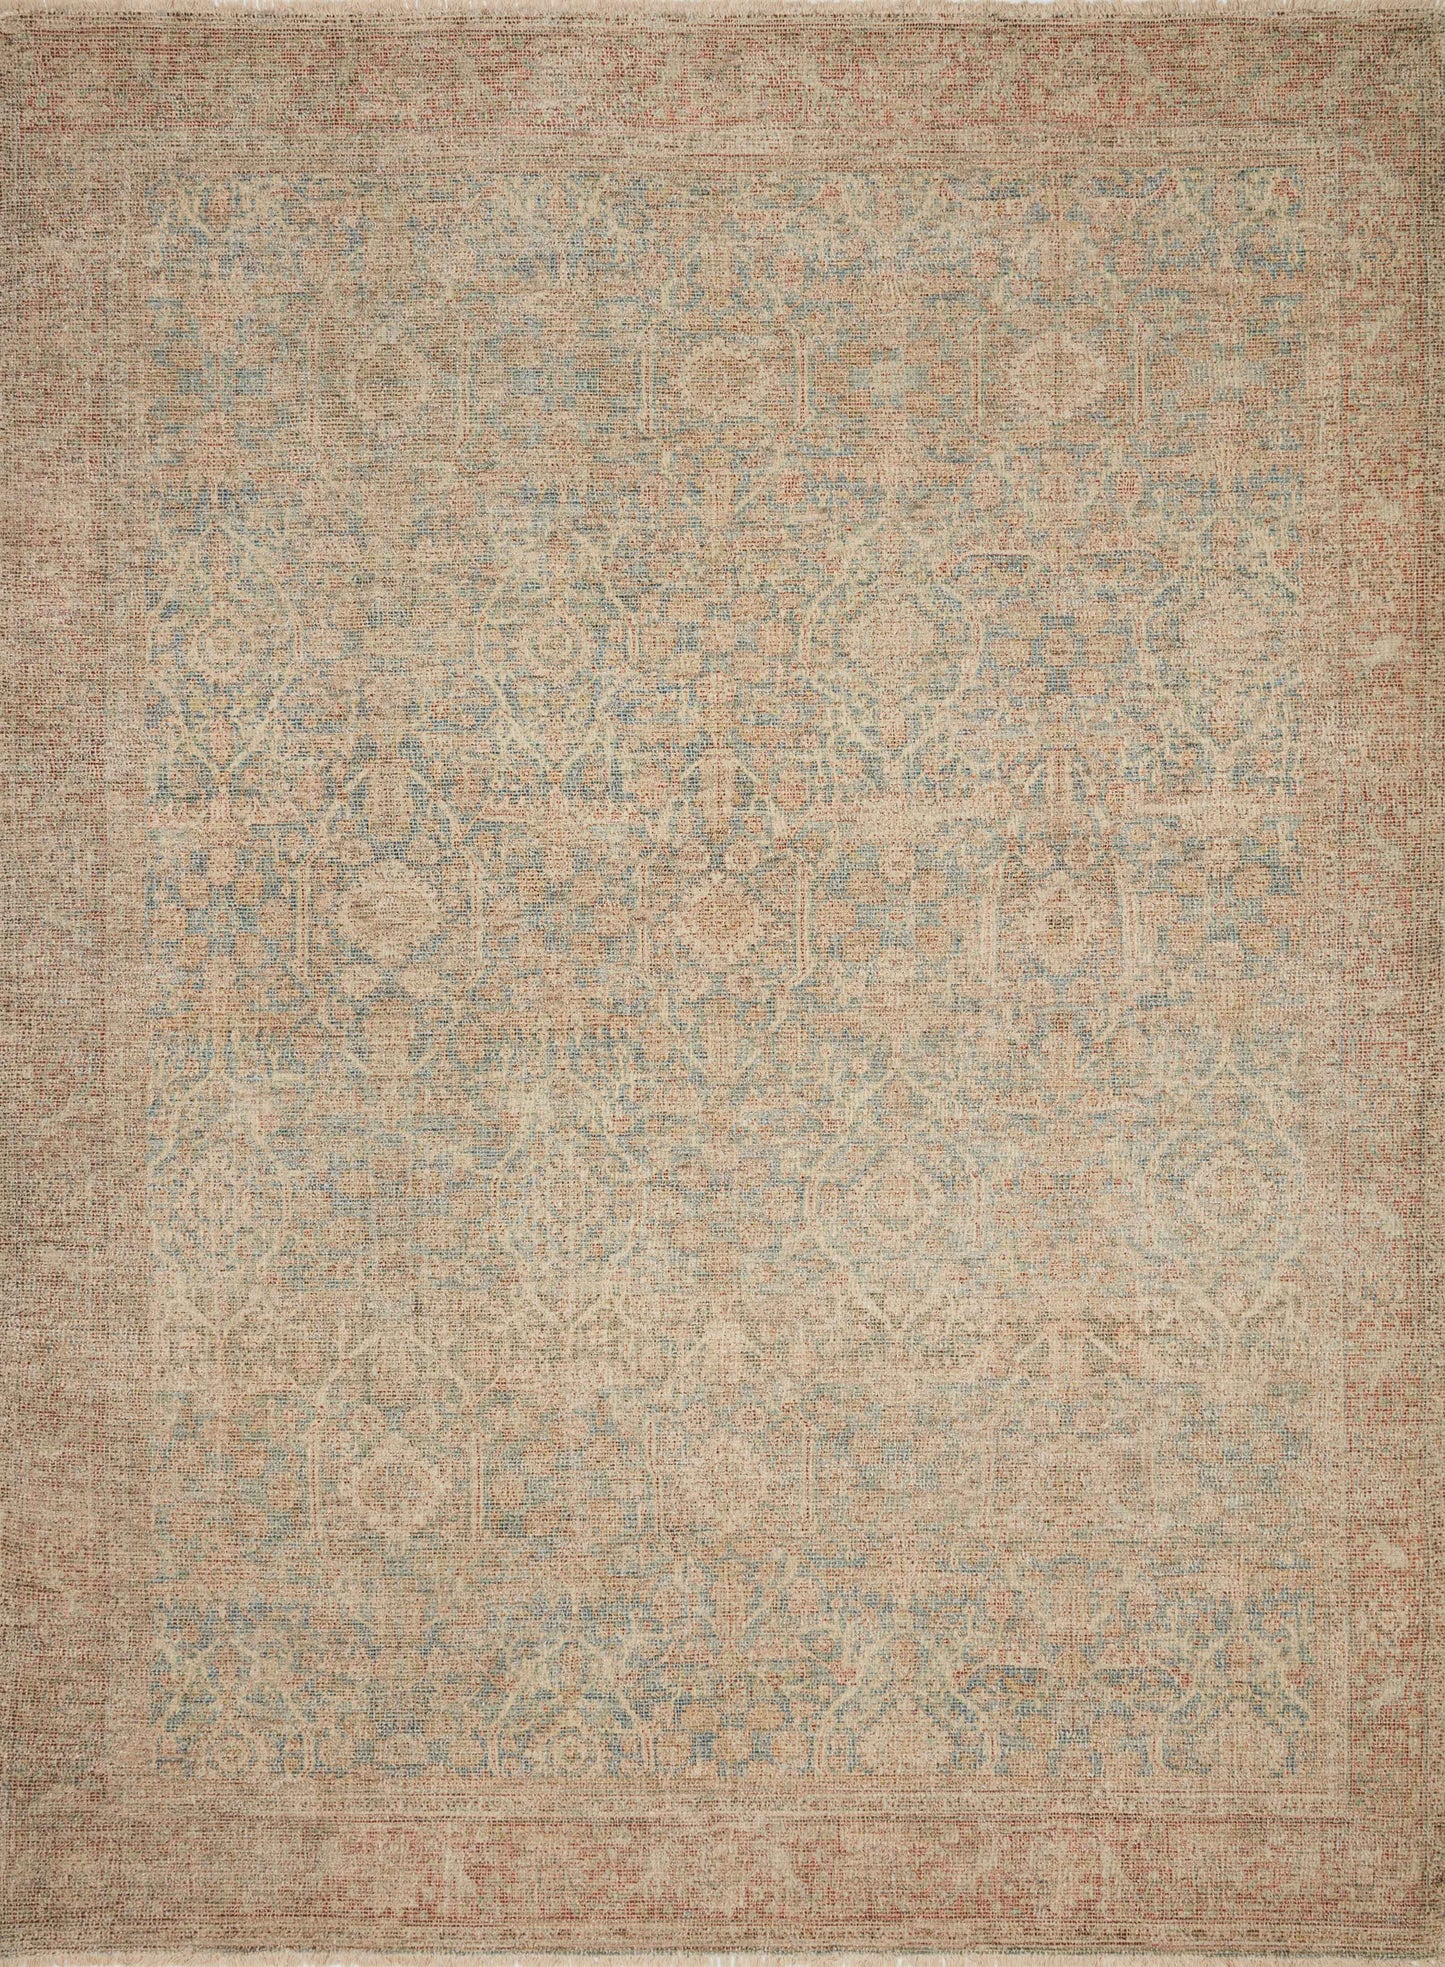 A picture of Loloi's Priya rug, in style PRY-06, color Denim / Rust